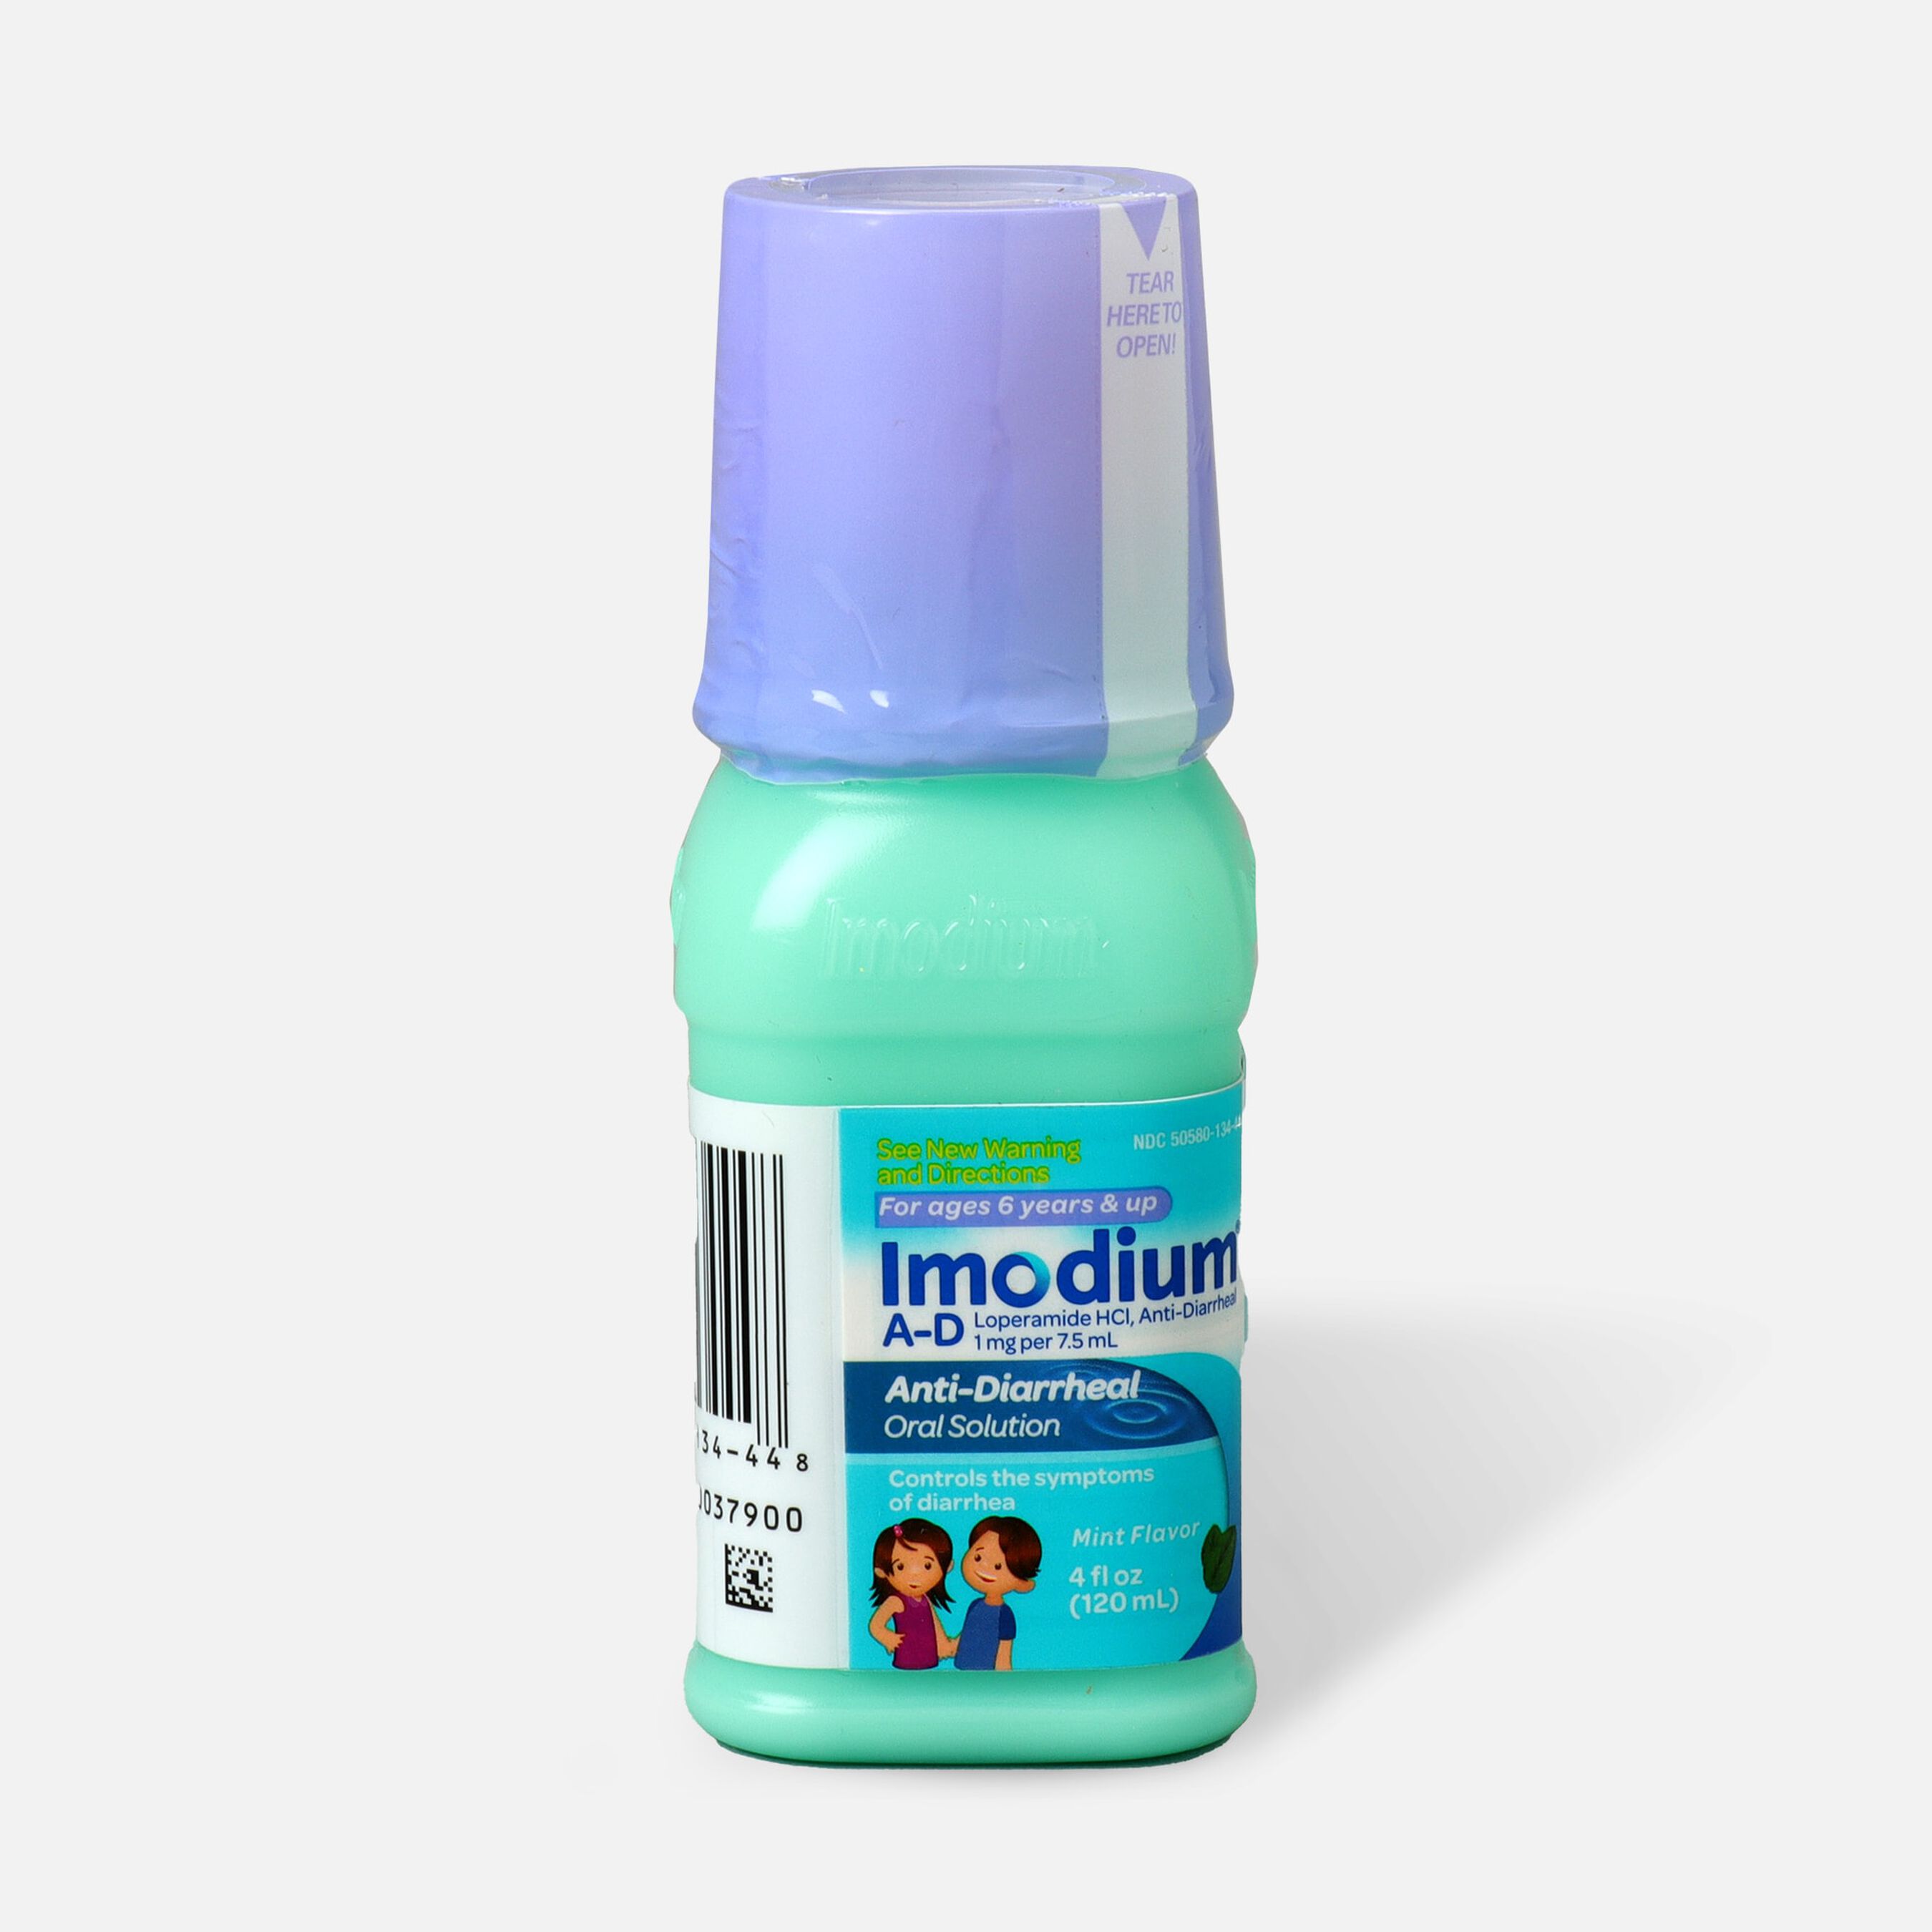 imodium ad for toddler